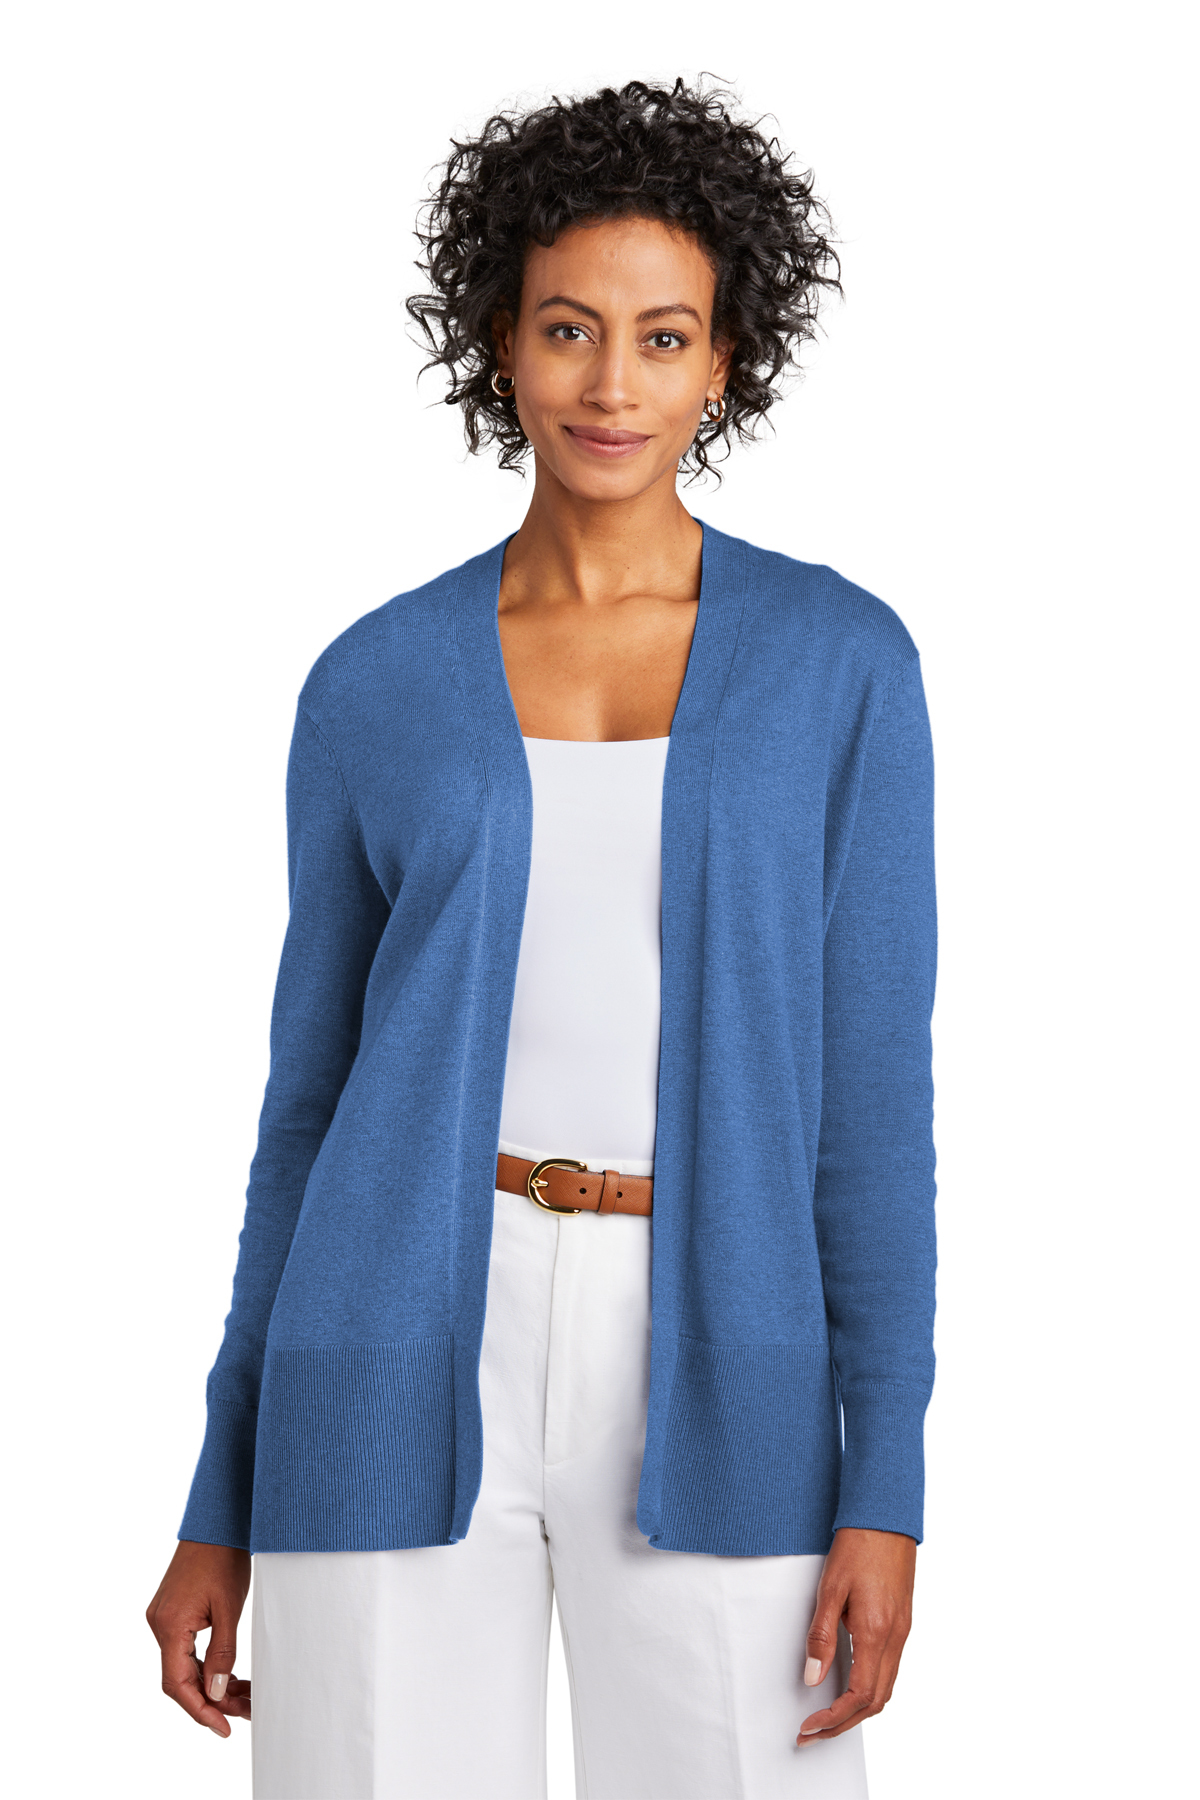 Brooks Brothers Women's Cotton Stretch Long Cardigan Sweater